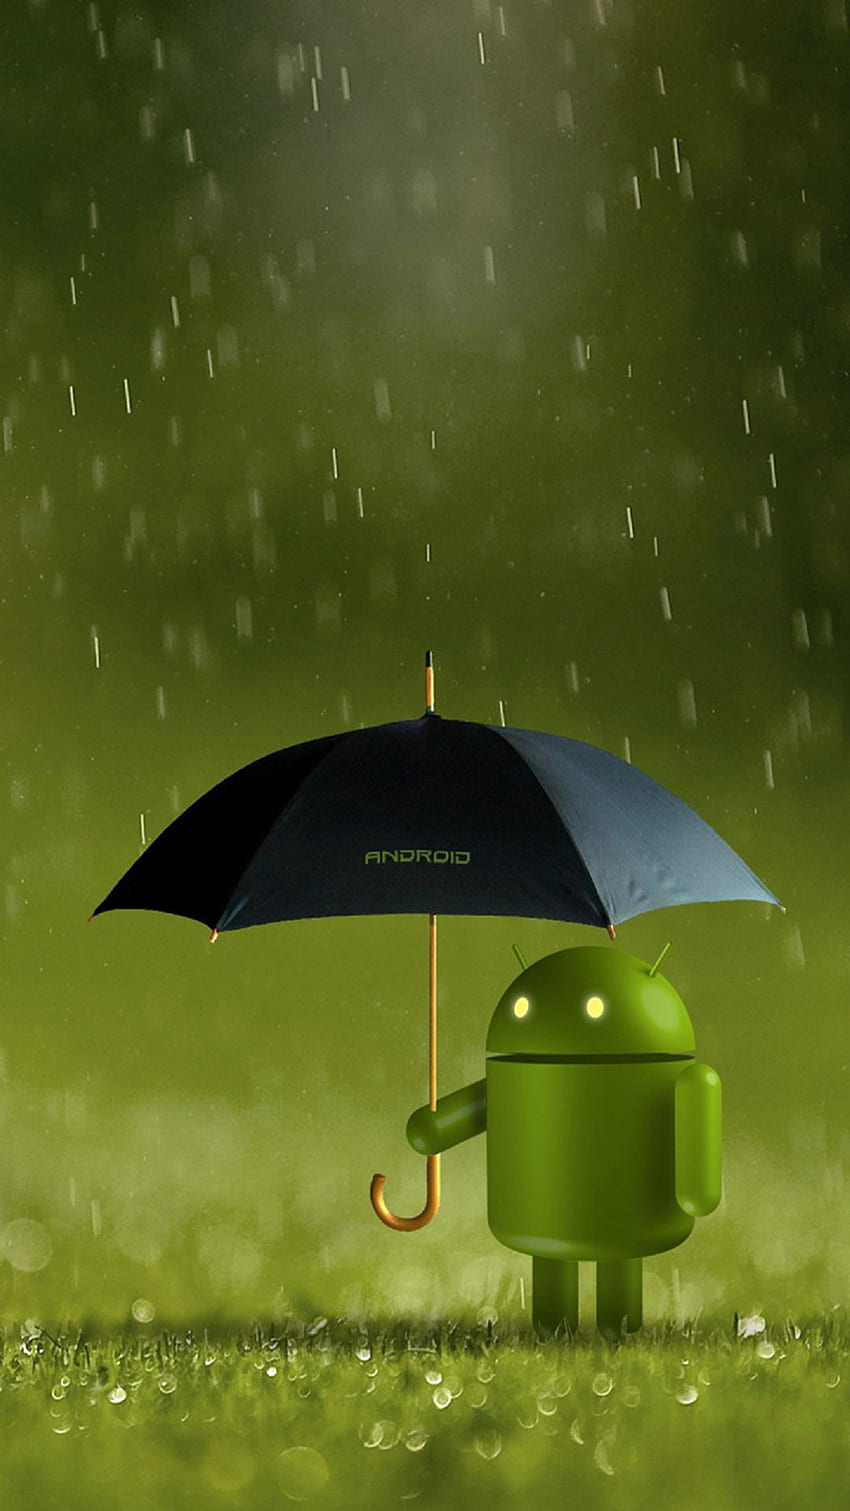 Android Robot In The Rain Black Umbrella Android HD phone wallpaper